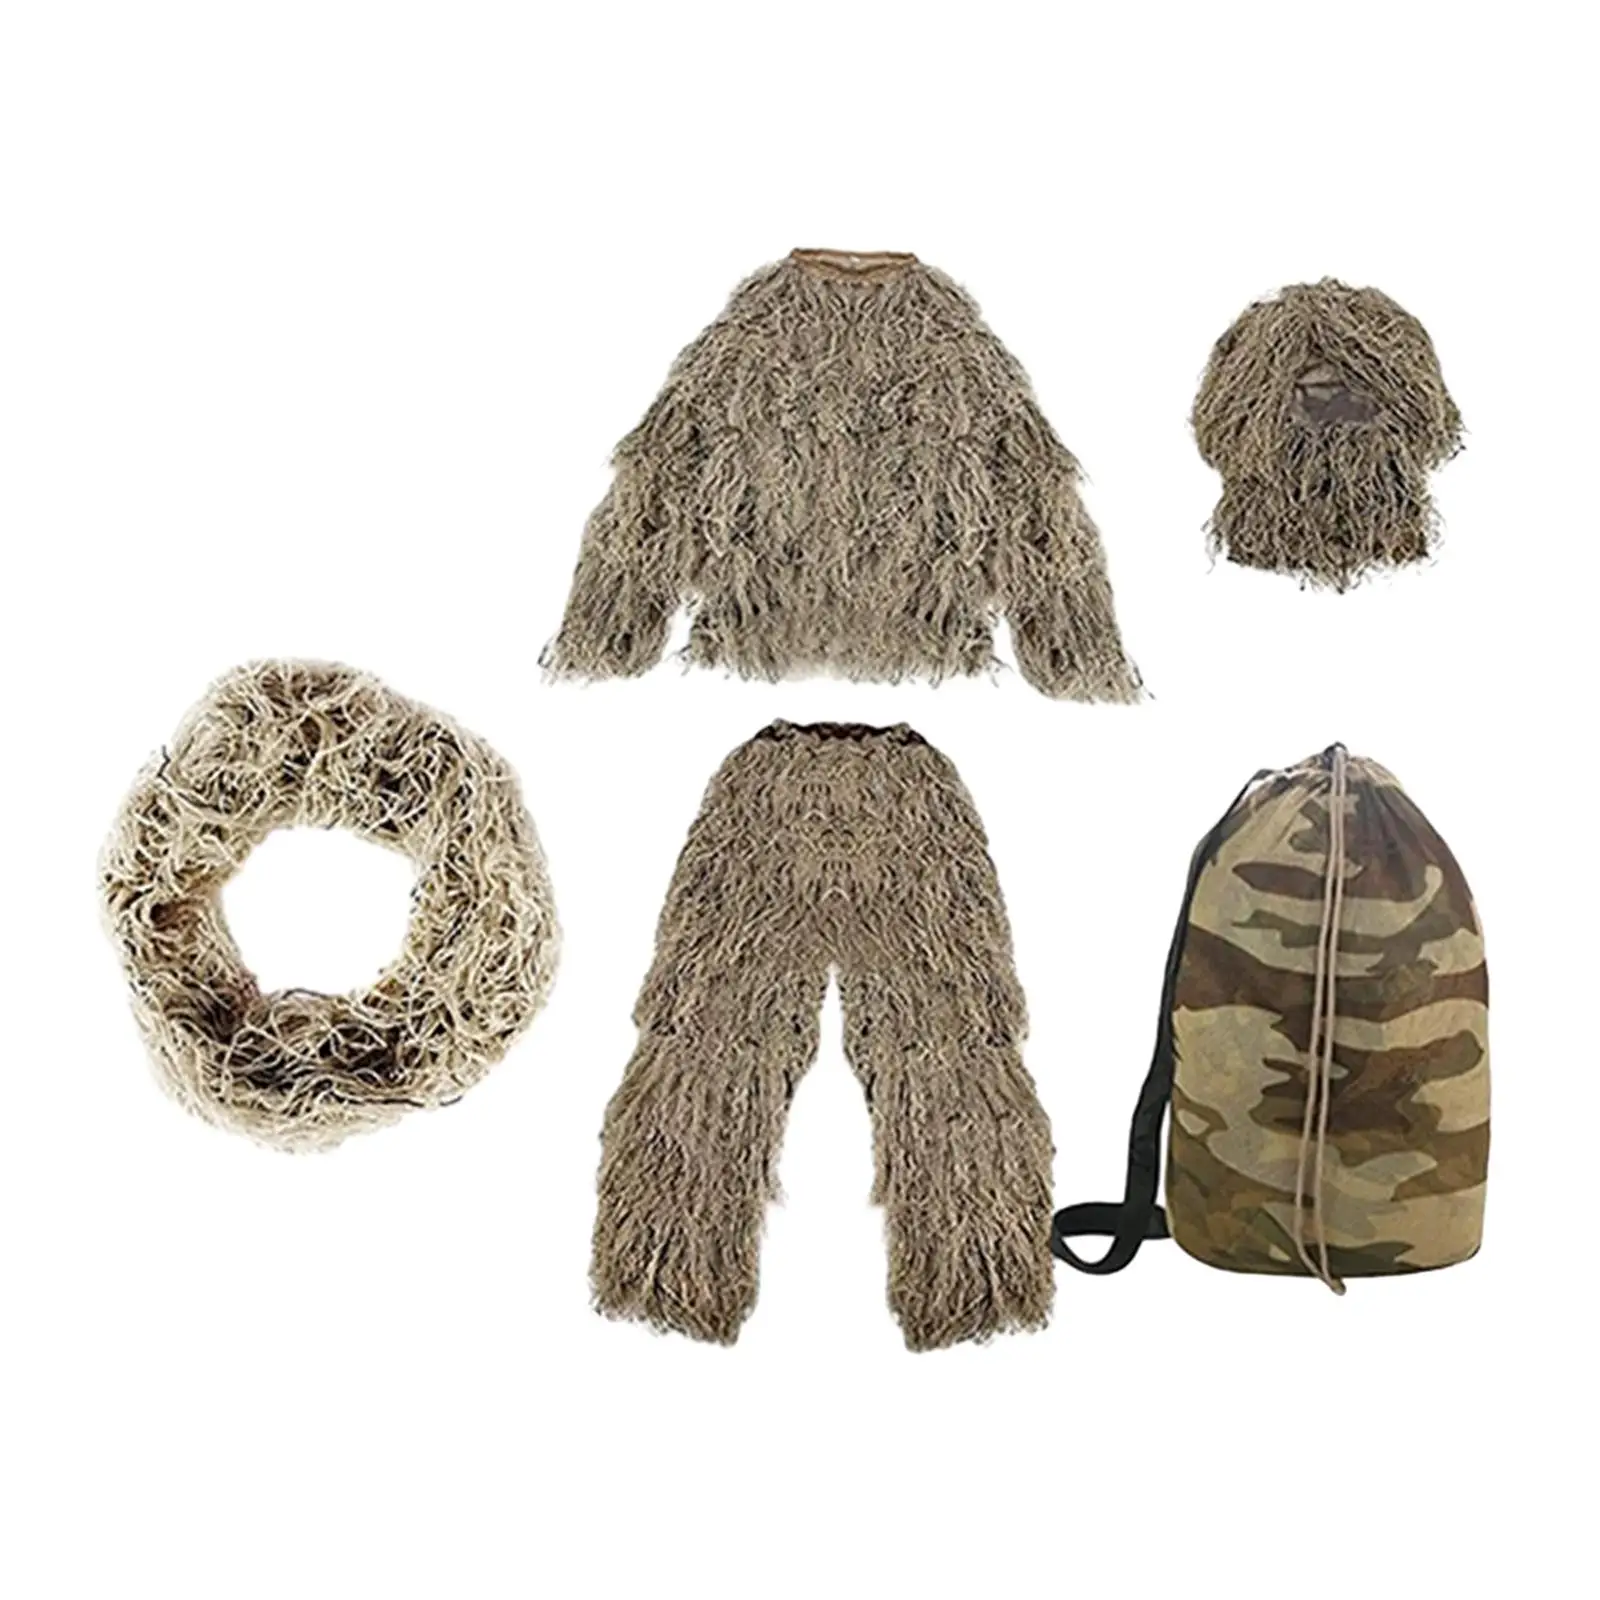 Kids Ghillie Suit Disguise Clothes Clothing for Bird Watching